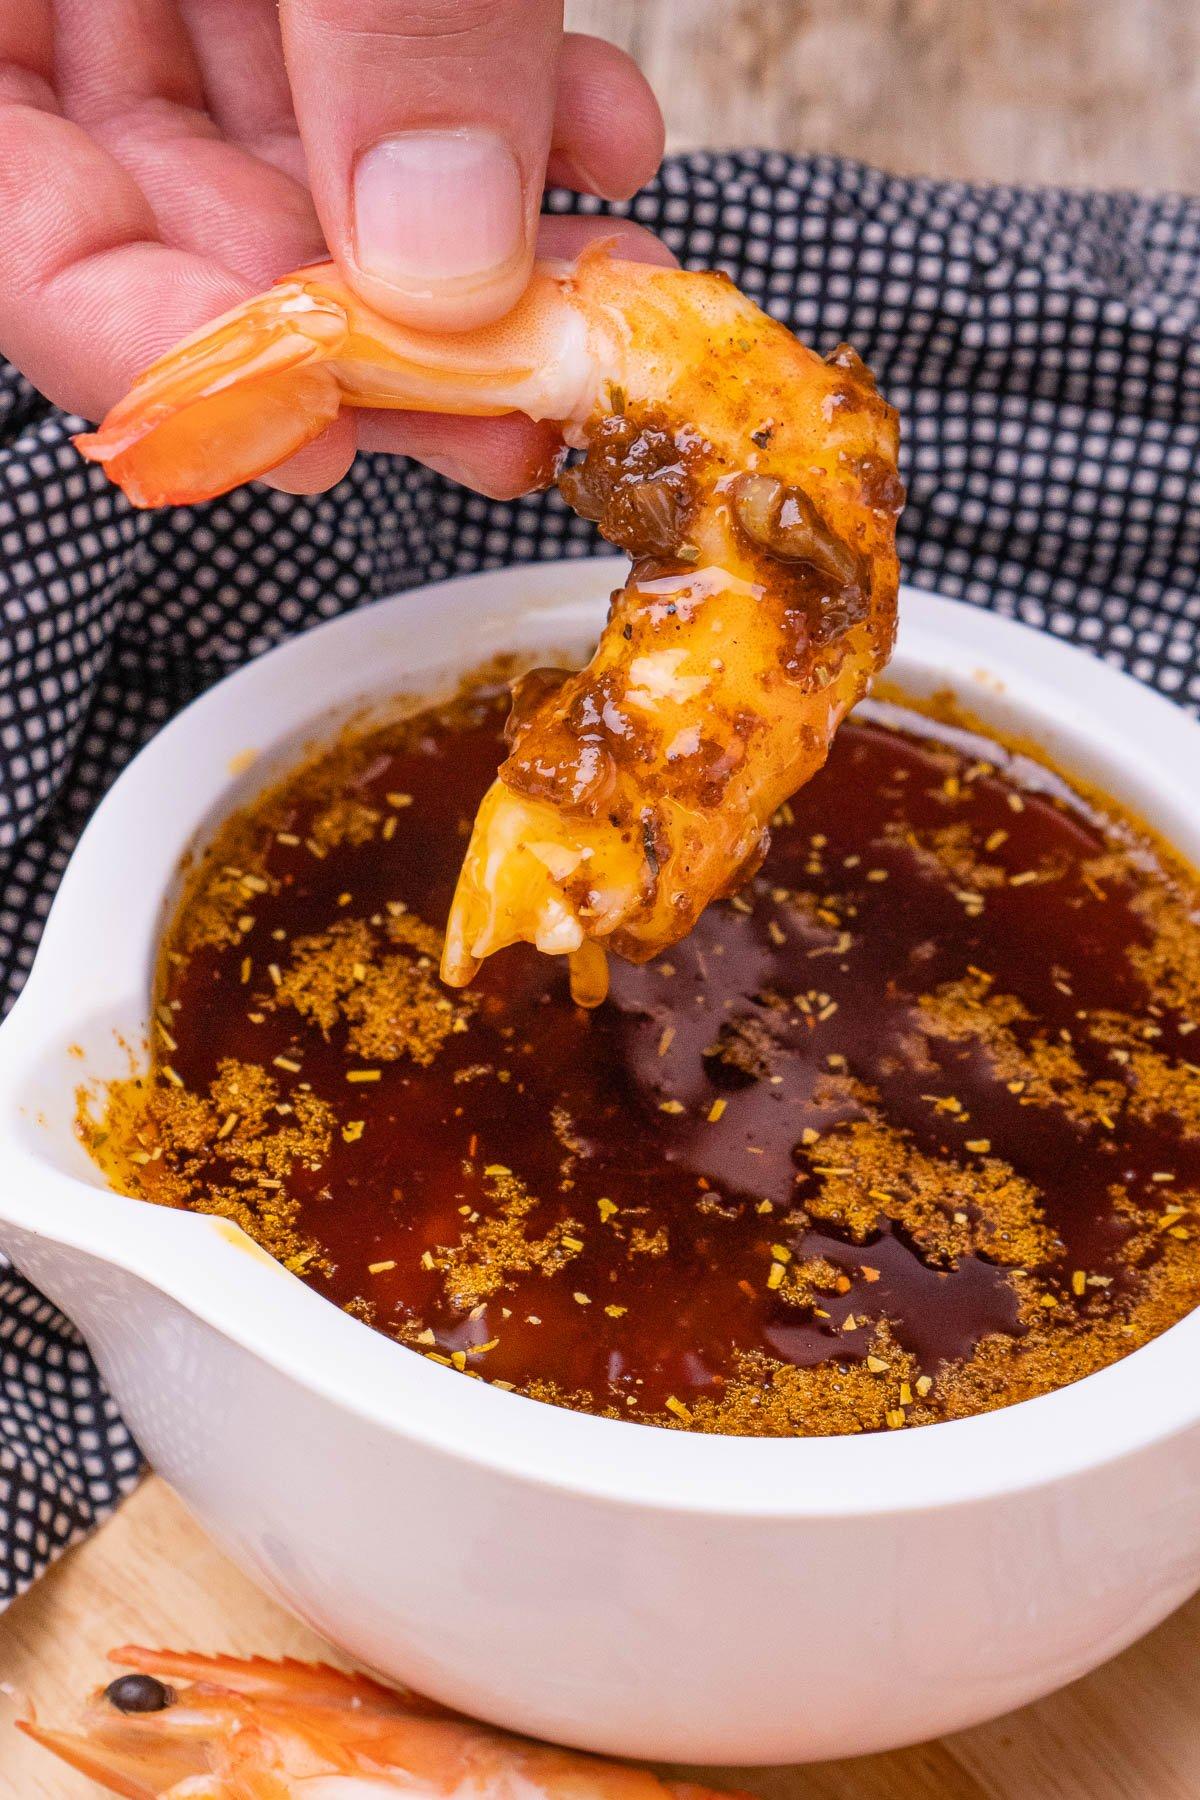 Dipping a prawn into seafood boil sauce